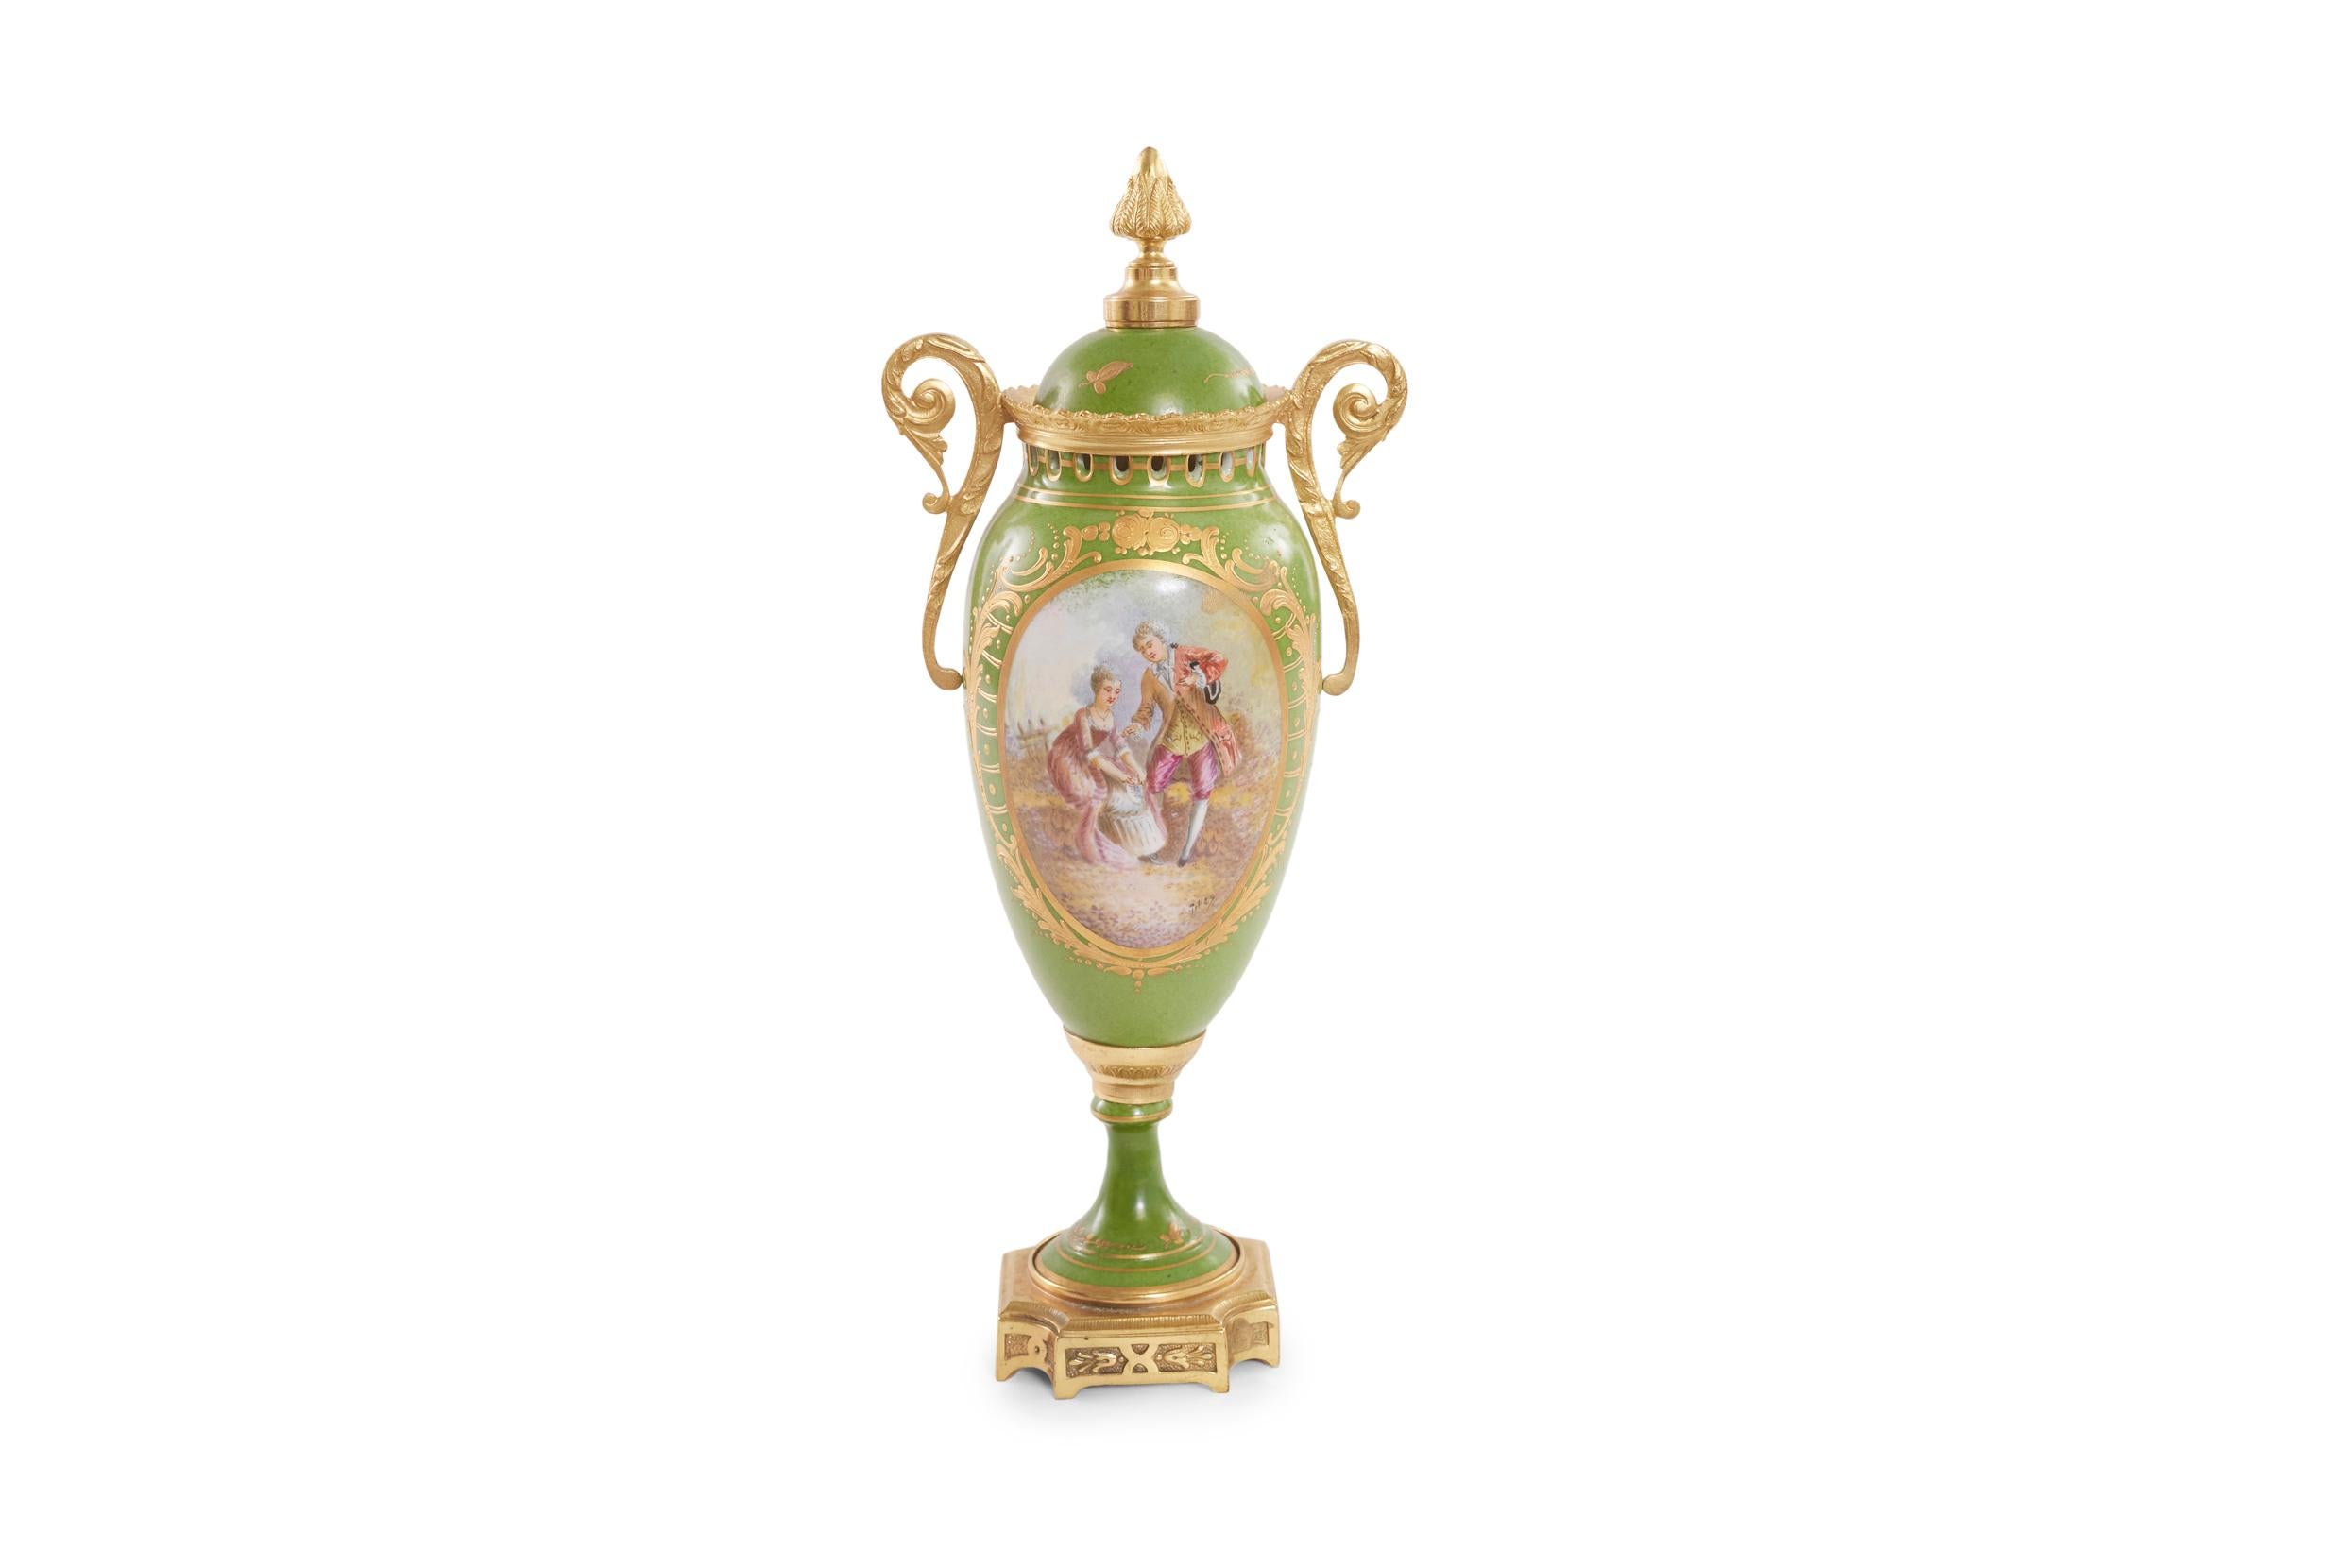 Late 19th century pair french porcelain covered decorative urn with side handles & exterior painted design details. Each urn is in great condition. Minor wear consistent with age / use. Artist signature Gilles lower right of each scene. One with